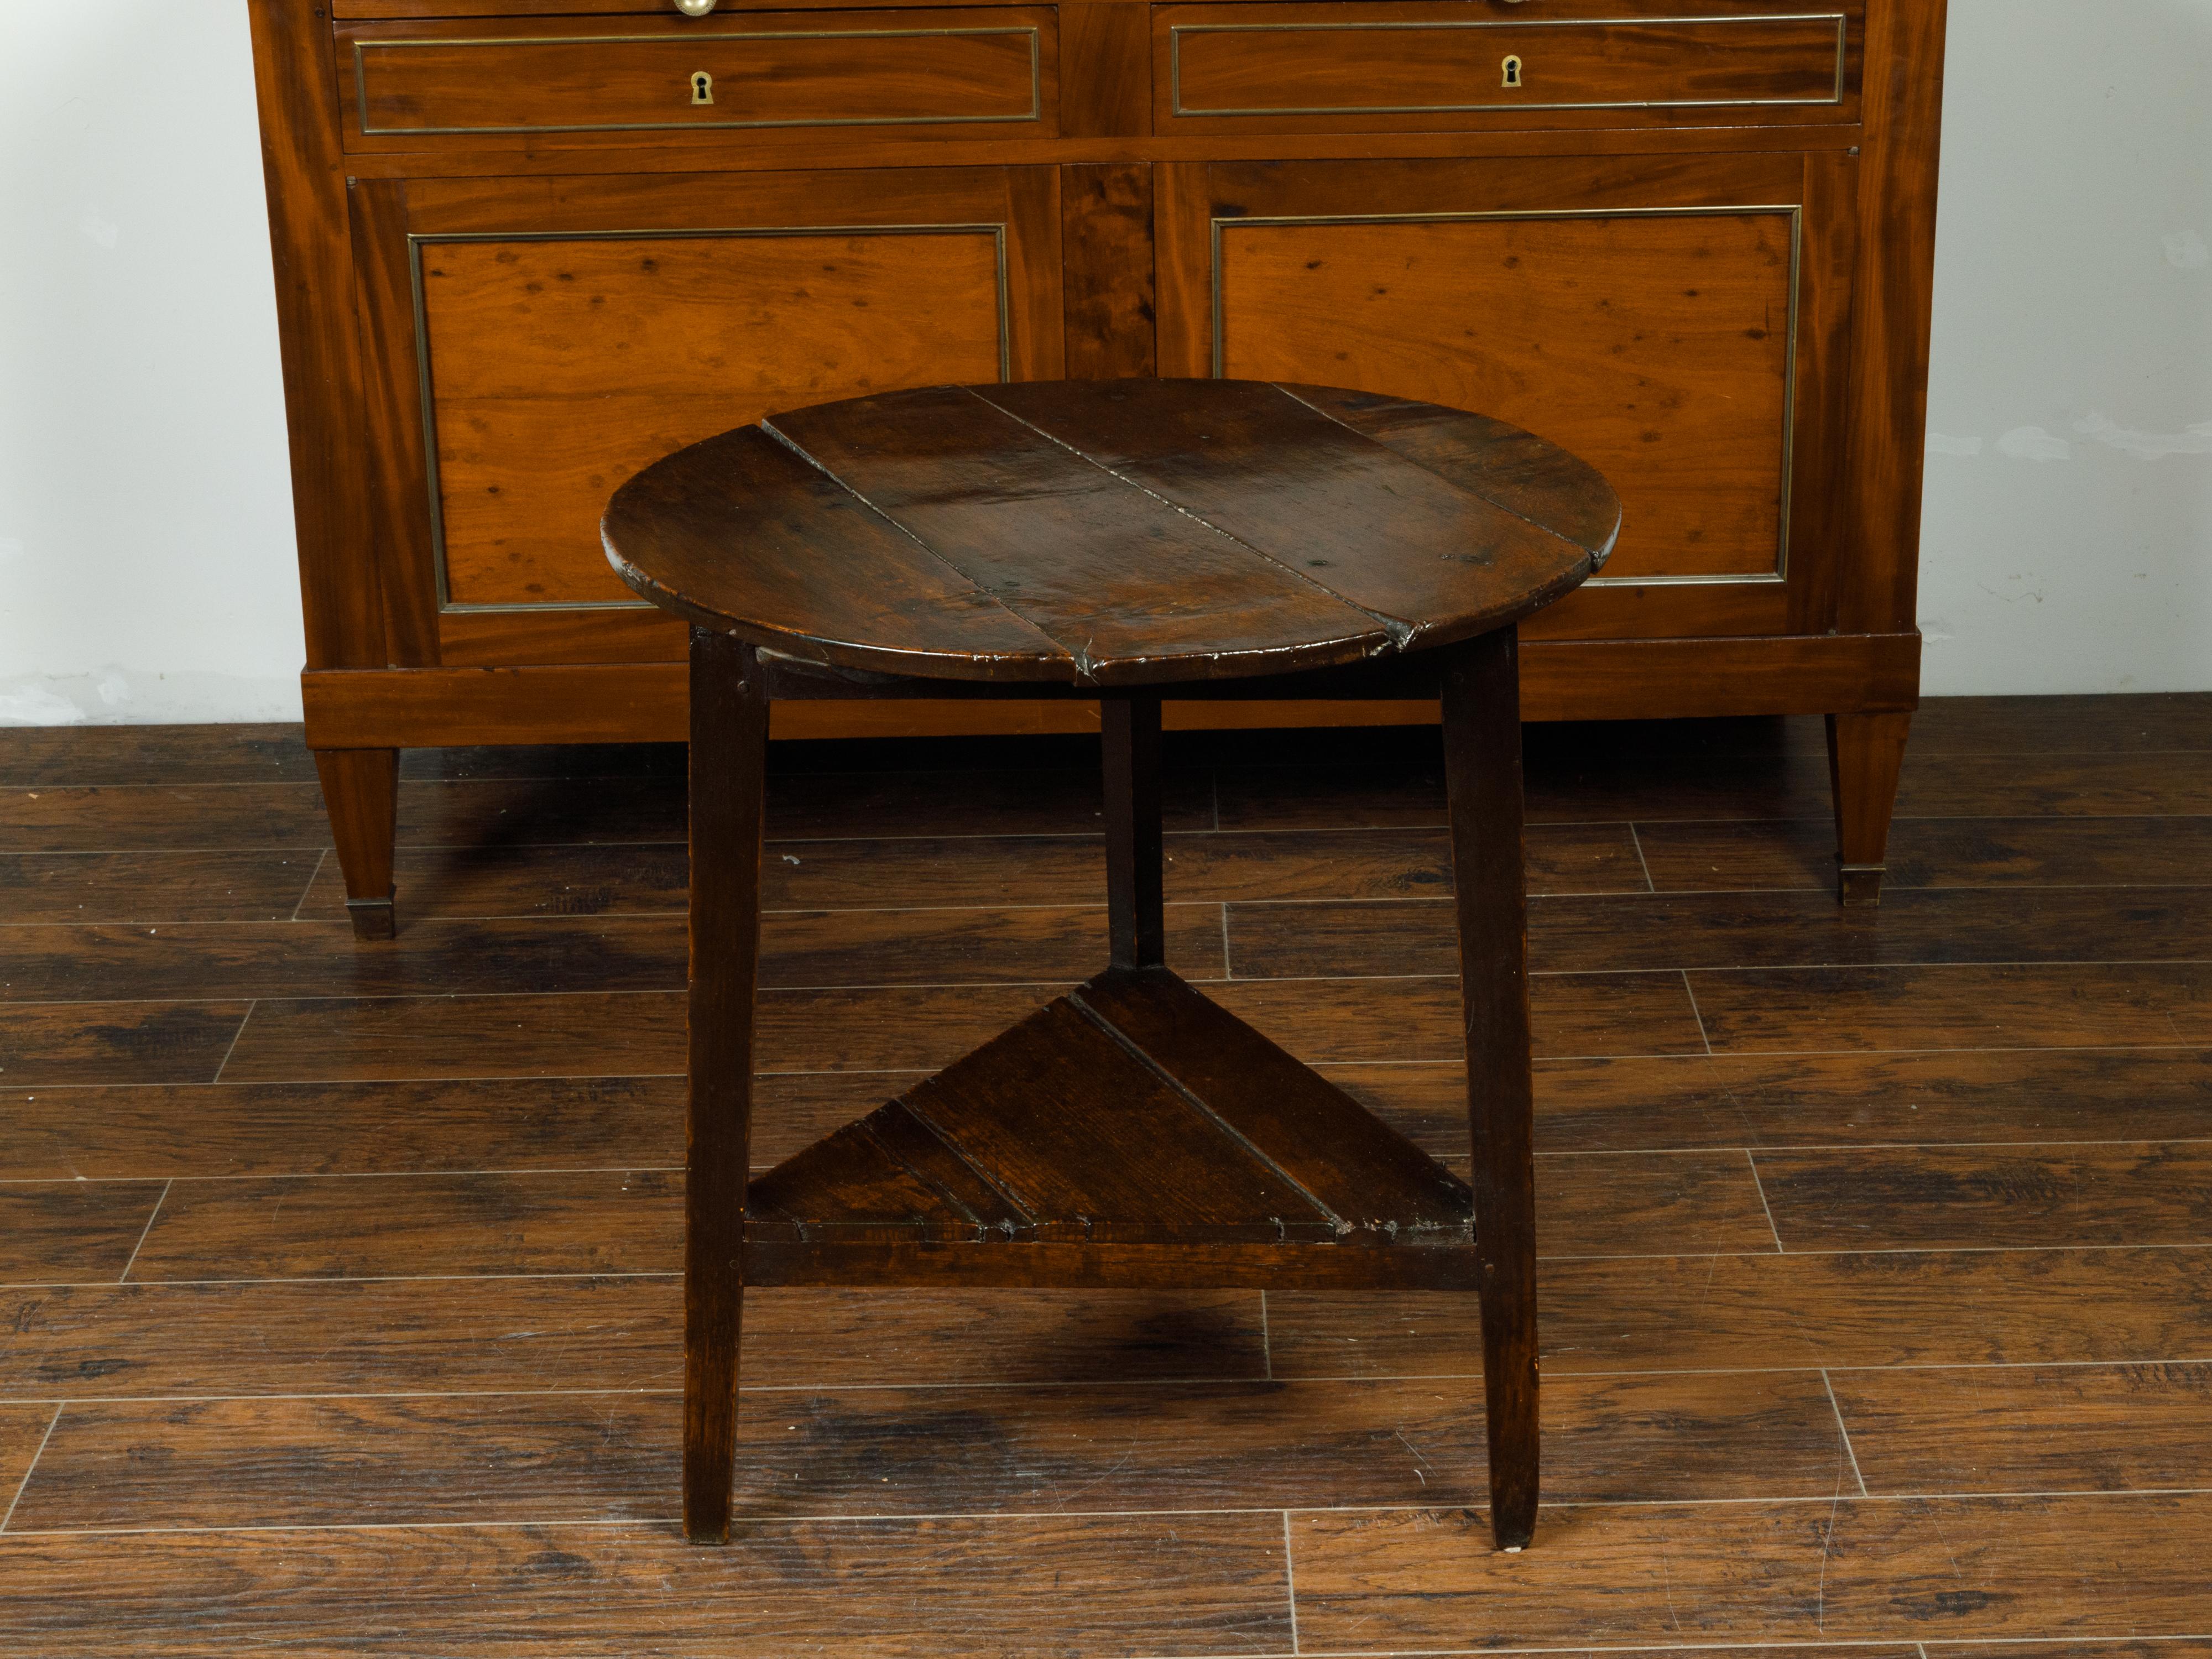 An English oak cricket table from the early 19th century, with circular top, triangular shelf and dark patina. Crafted in England during the early years of the 19th century, this rustic cricket side table features a round top sitting above a simple